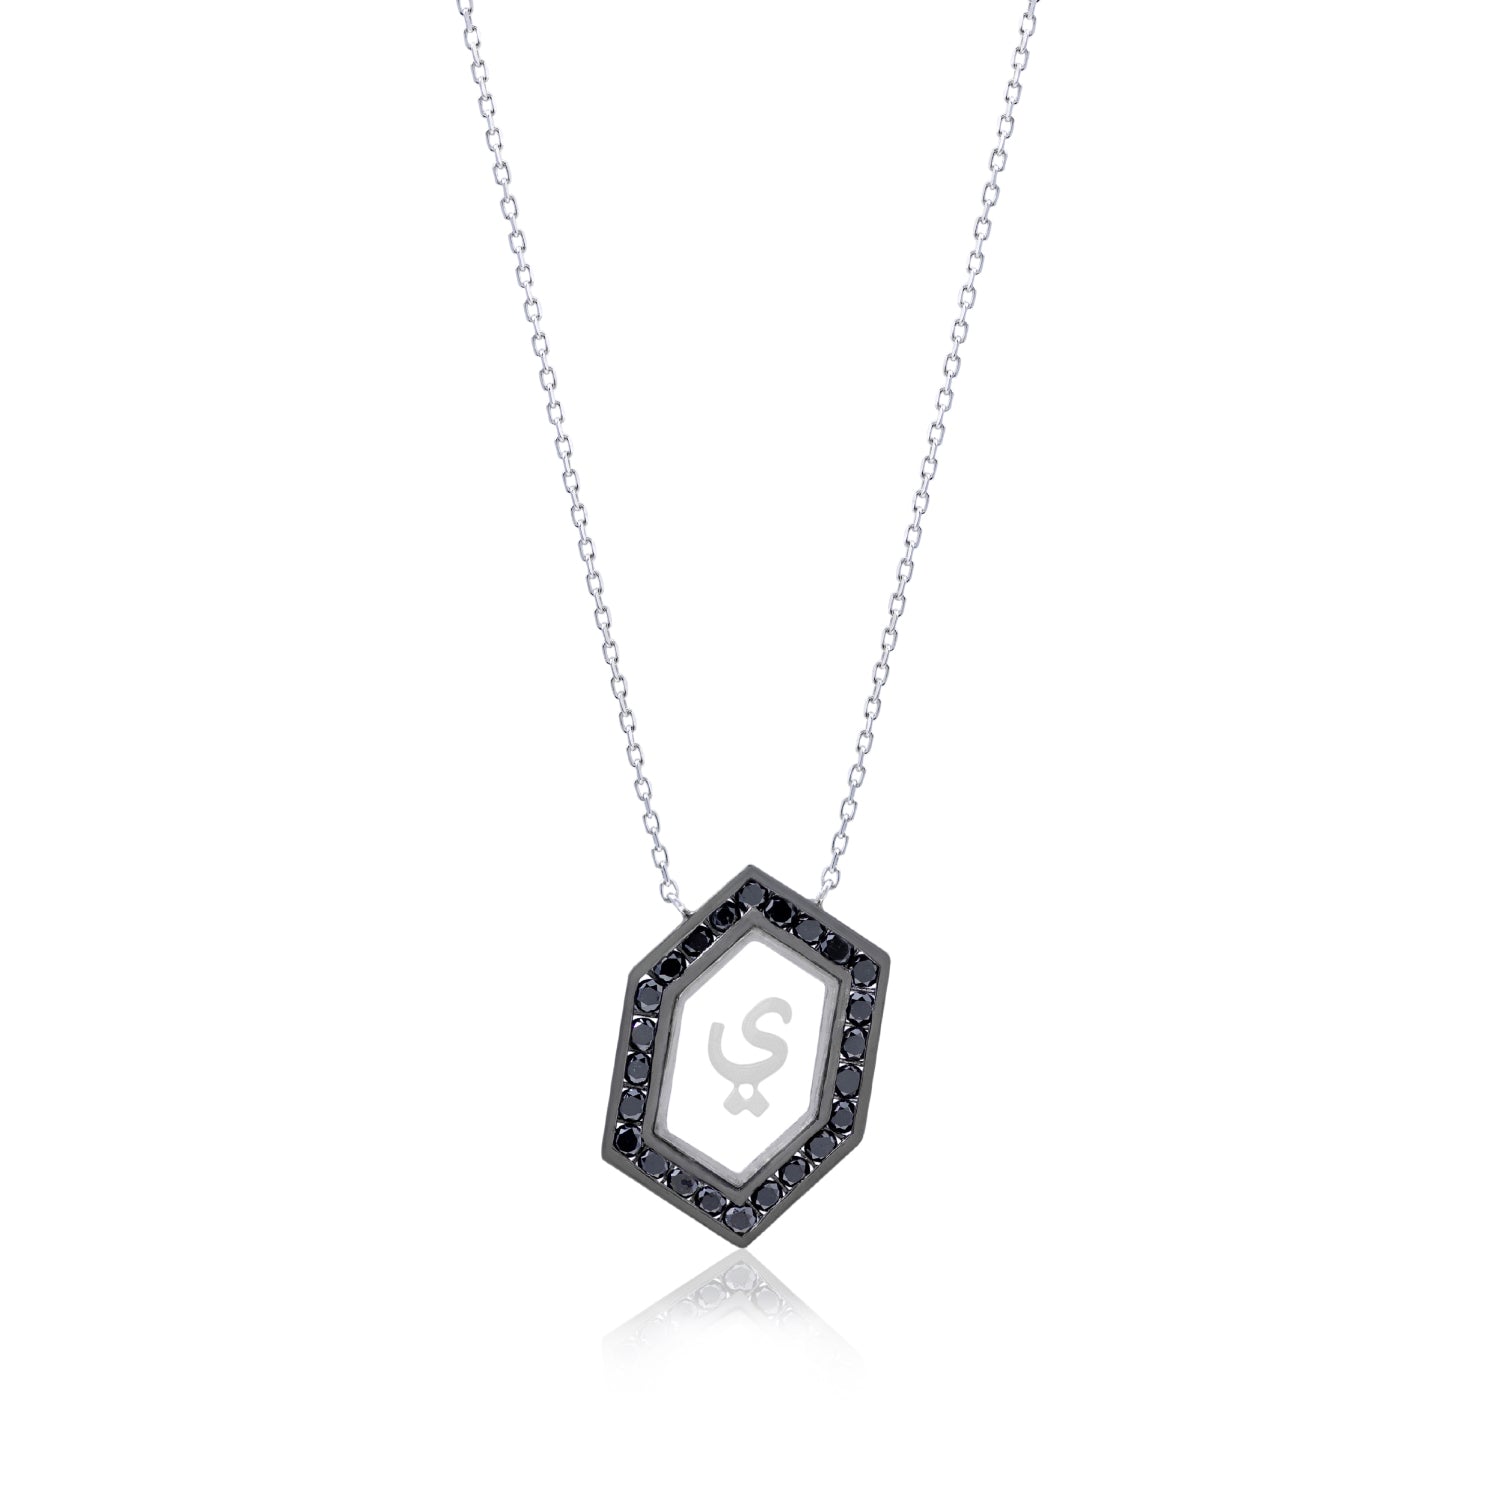 Qamoos 1.0 Letter ي Black Diamond Necklace in Black Rhodium-Plated White Gold